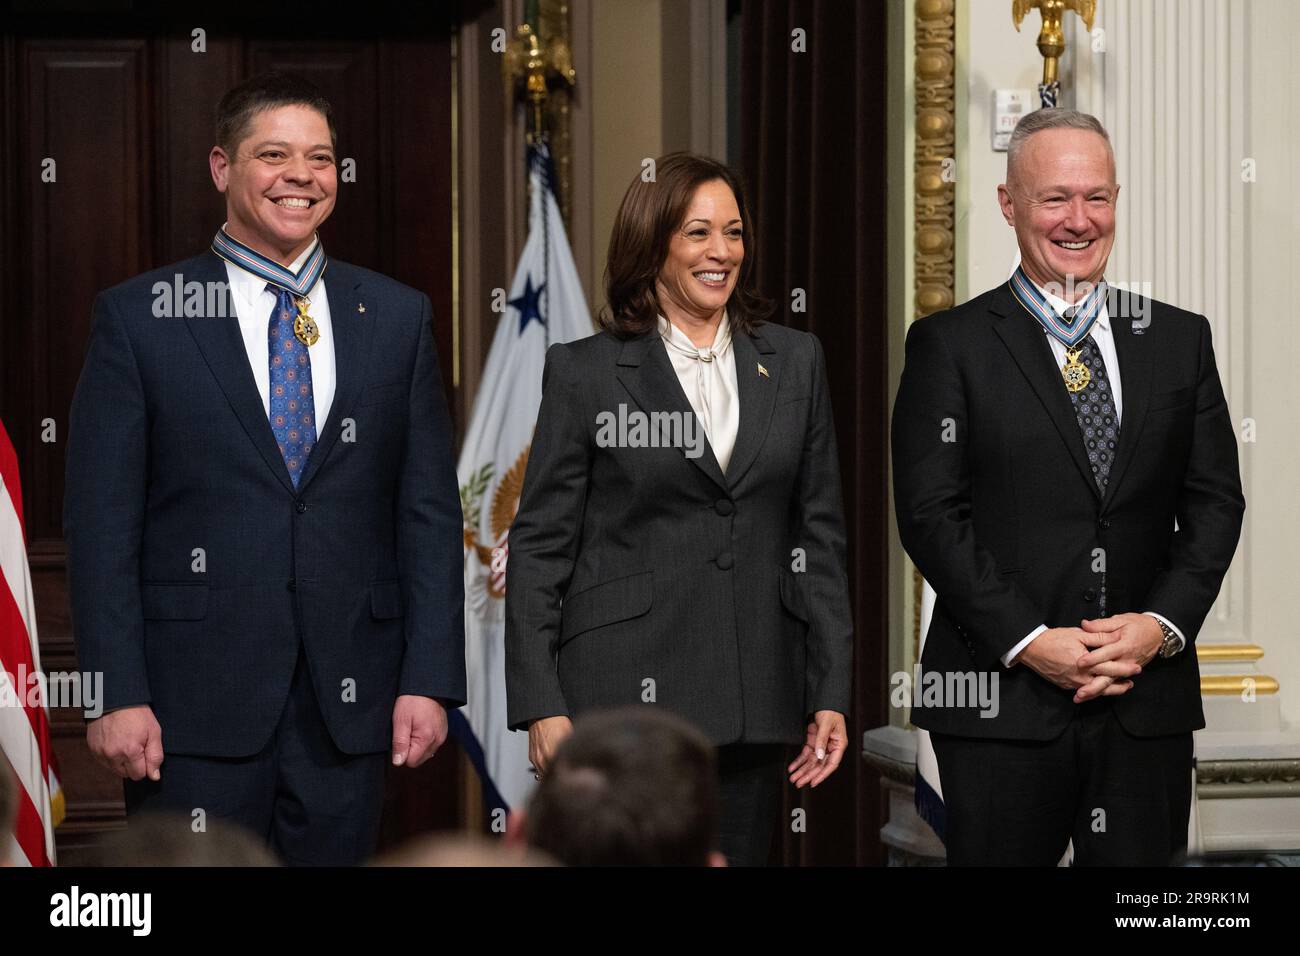 Congressional Space Medal of Honor Ceremony. Former NASA astronauts Robert Behnken, left, and Douglas Hurley, right, are seen after being awarded the Congressional Space Medal of Honor by Vice President Kamala Harris during a ceremony in the Indian Treaty Room of the Eisenhower Executive Office Building, Tuesday, Jan. 31, 2023 in Washington. Former astronauts Behnken and Hurley were awarded the Congressional Space Medal of Honor for their bravery in NASA’s SpaceX Demonstration Mission-2 to the International Space Station in 2020, the first crewed flight as part of the agency’s Commercial Crew Stock Photo